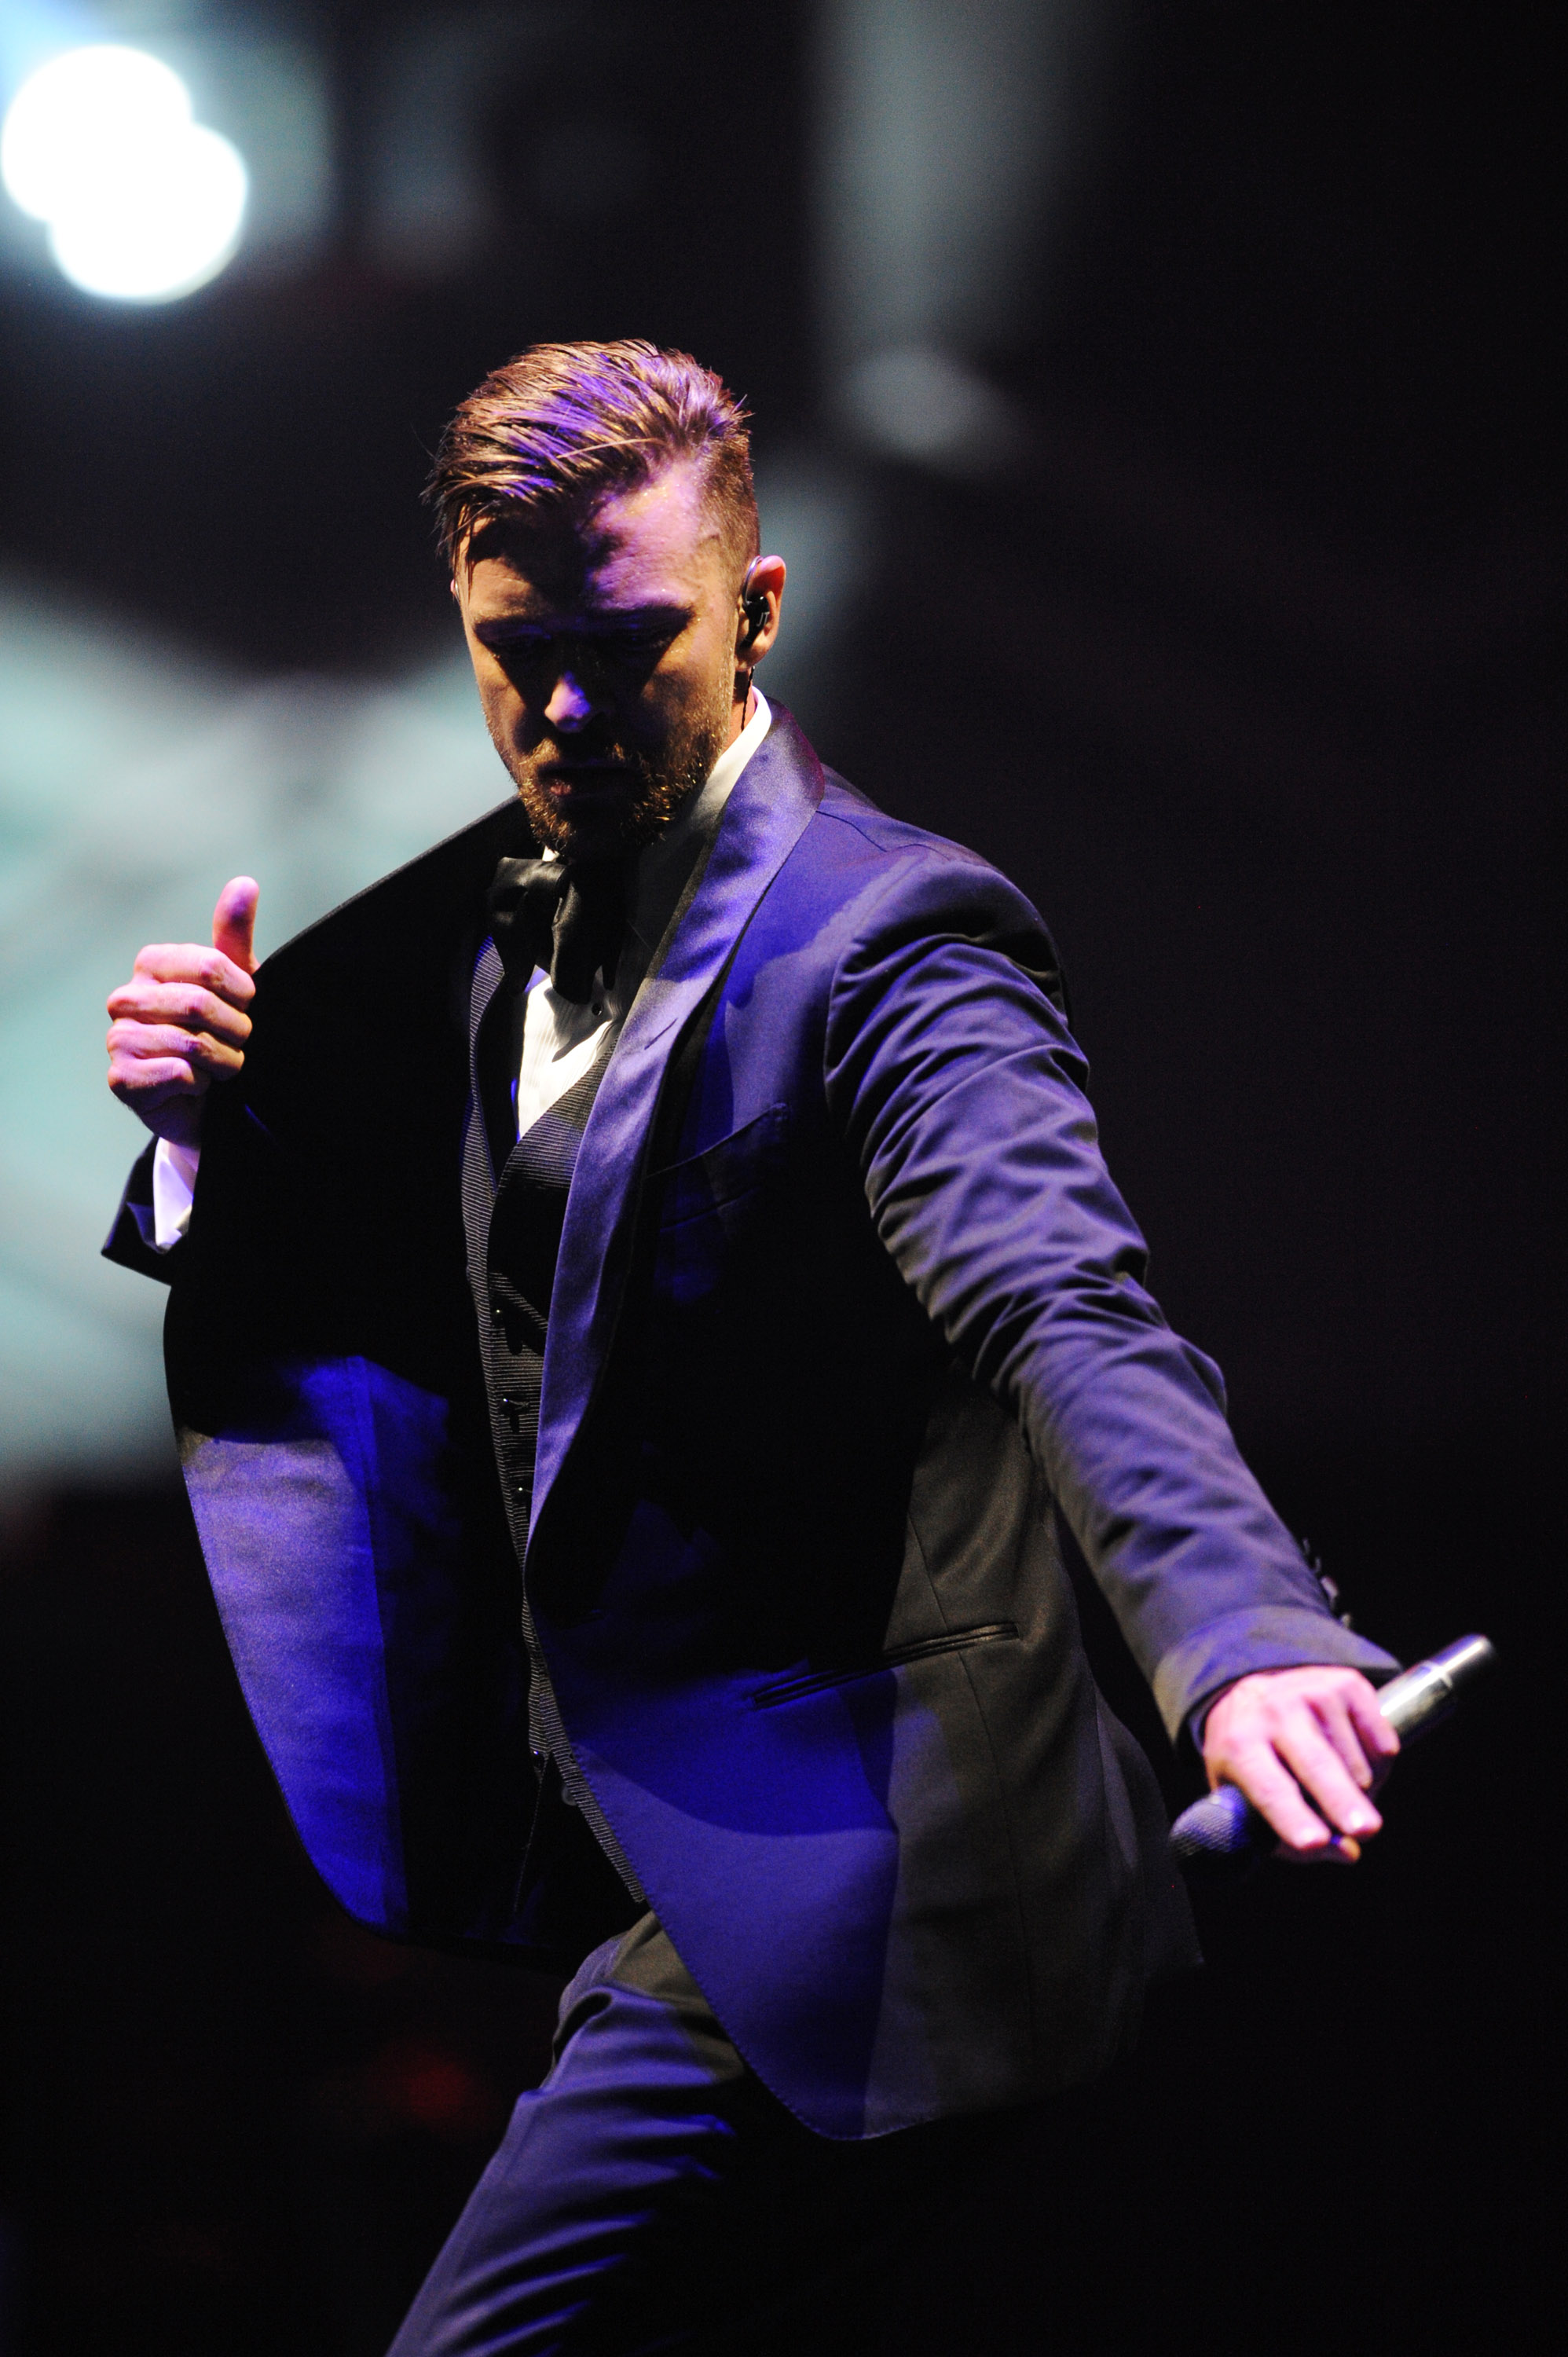 Justin Timberlake performs on his 20/20 Tour at The O2 Arena on April 1, 2014 in London, England. (Dave J Hogan&mdash;Getty Images)